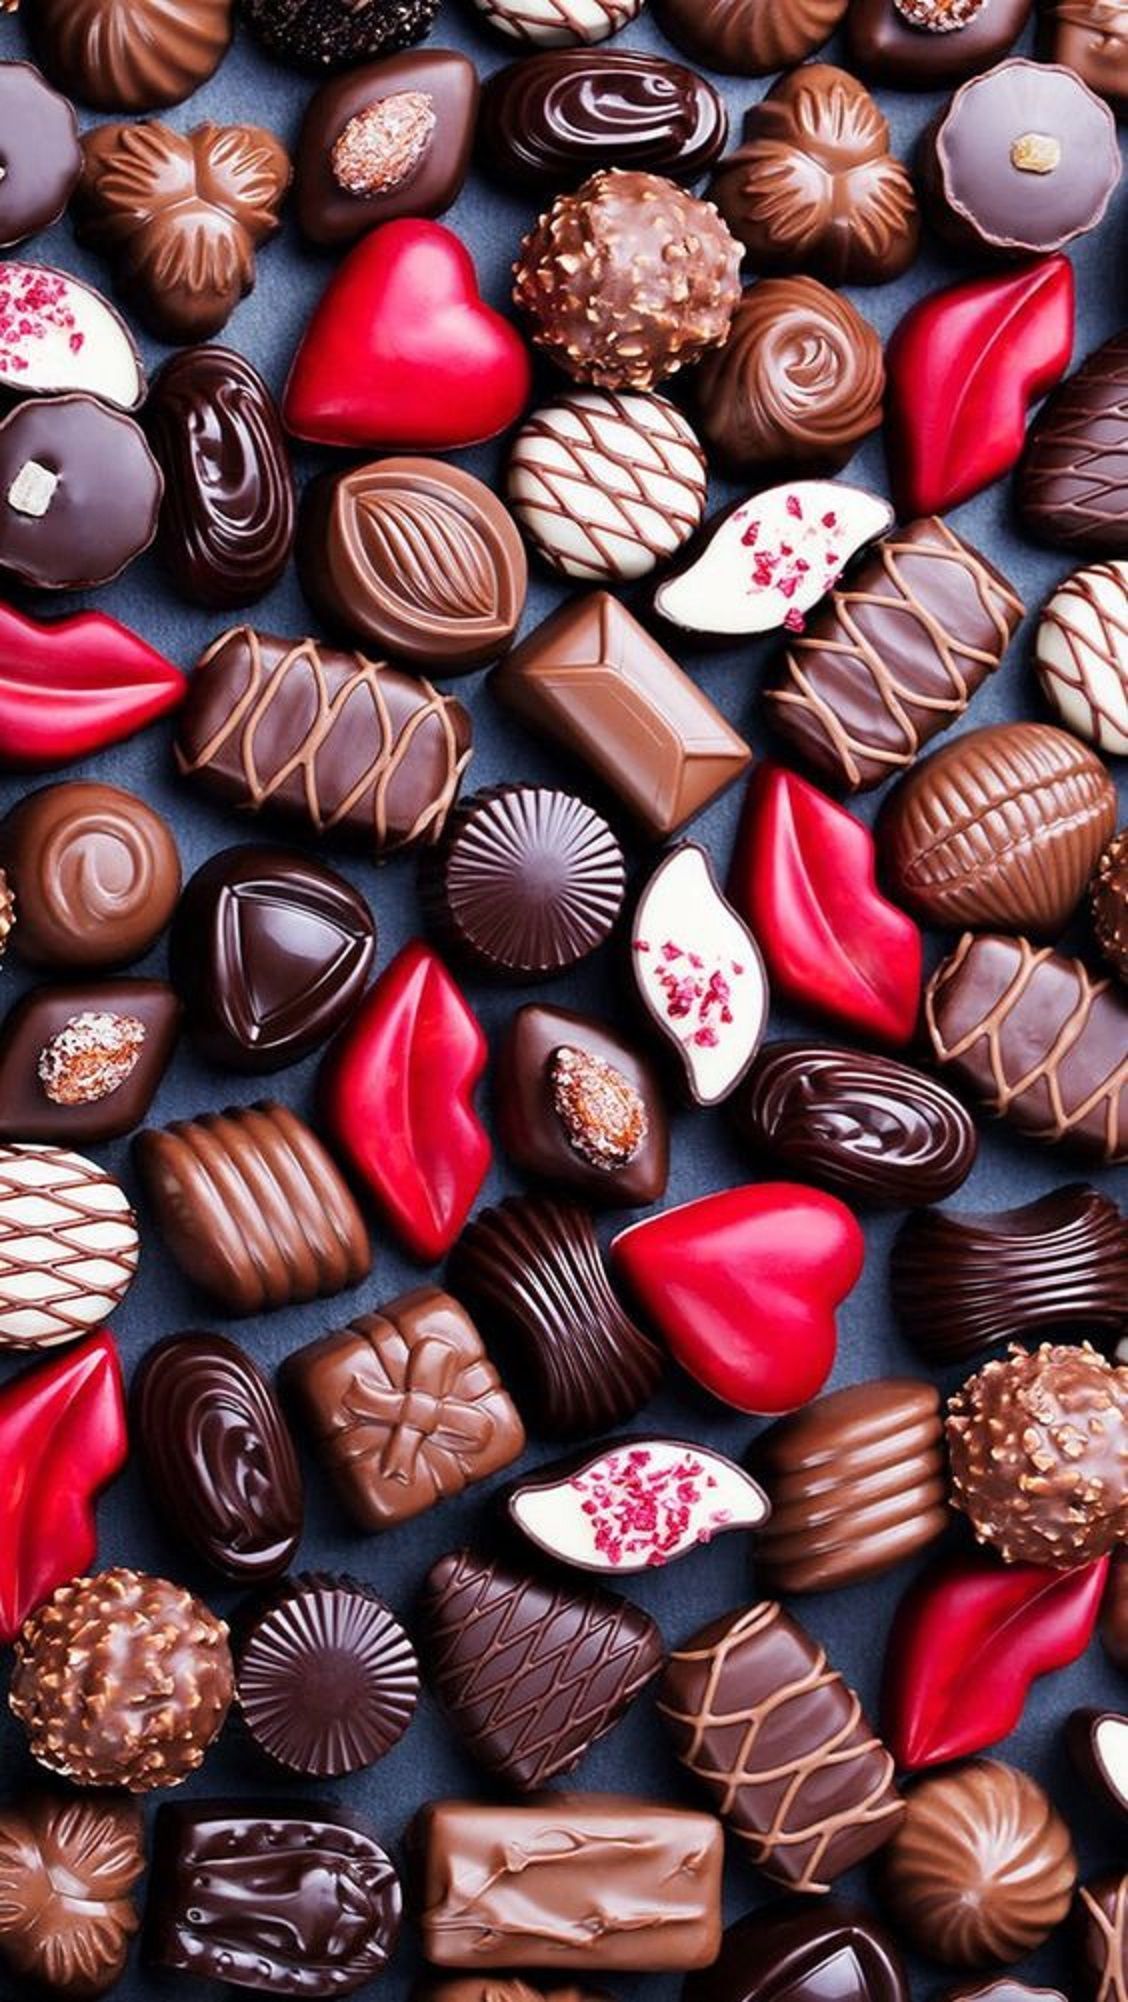 A collection of chocolates in various shapes and sizes. - Chocolate